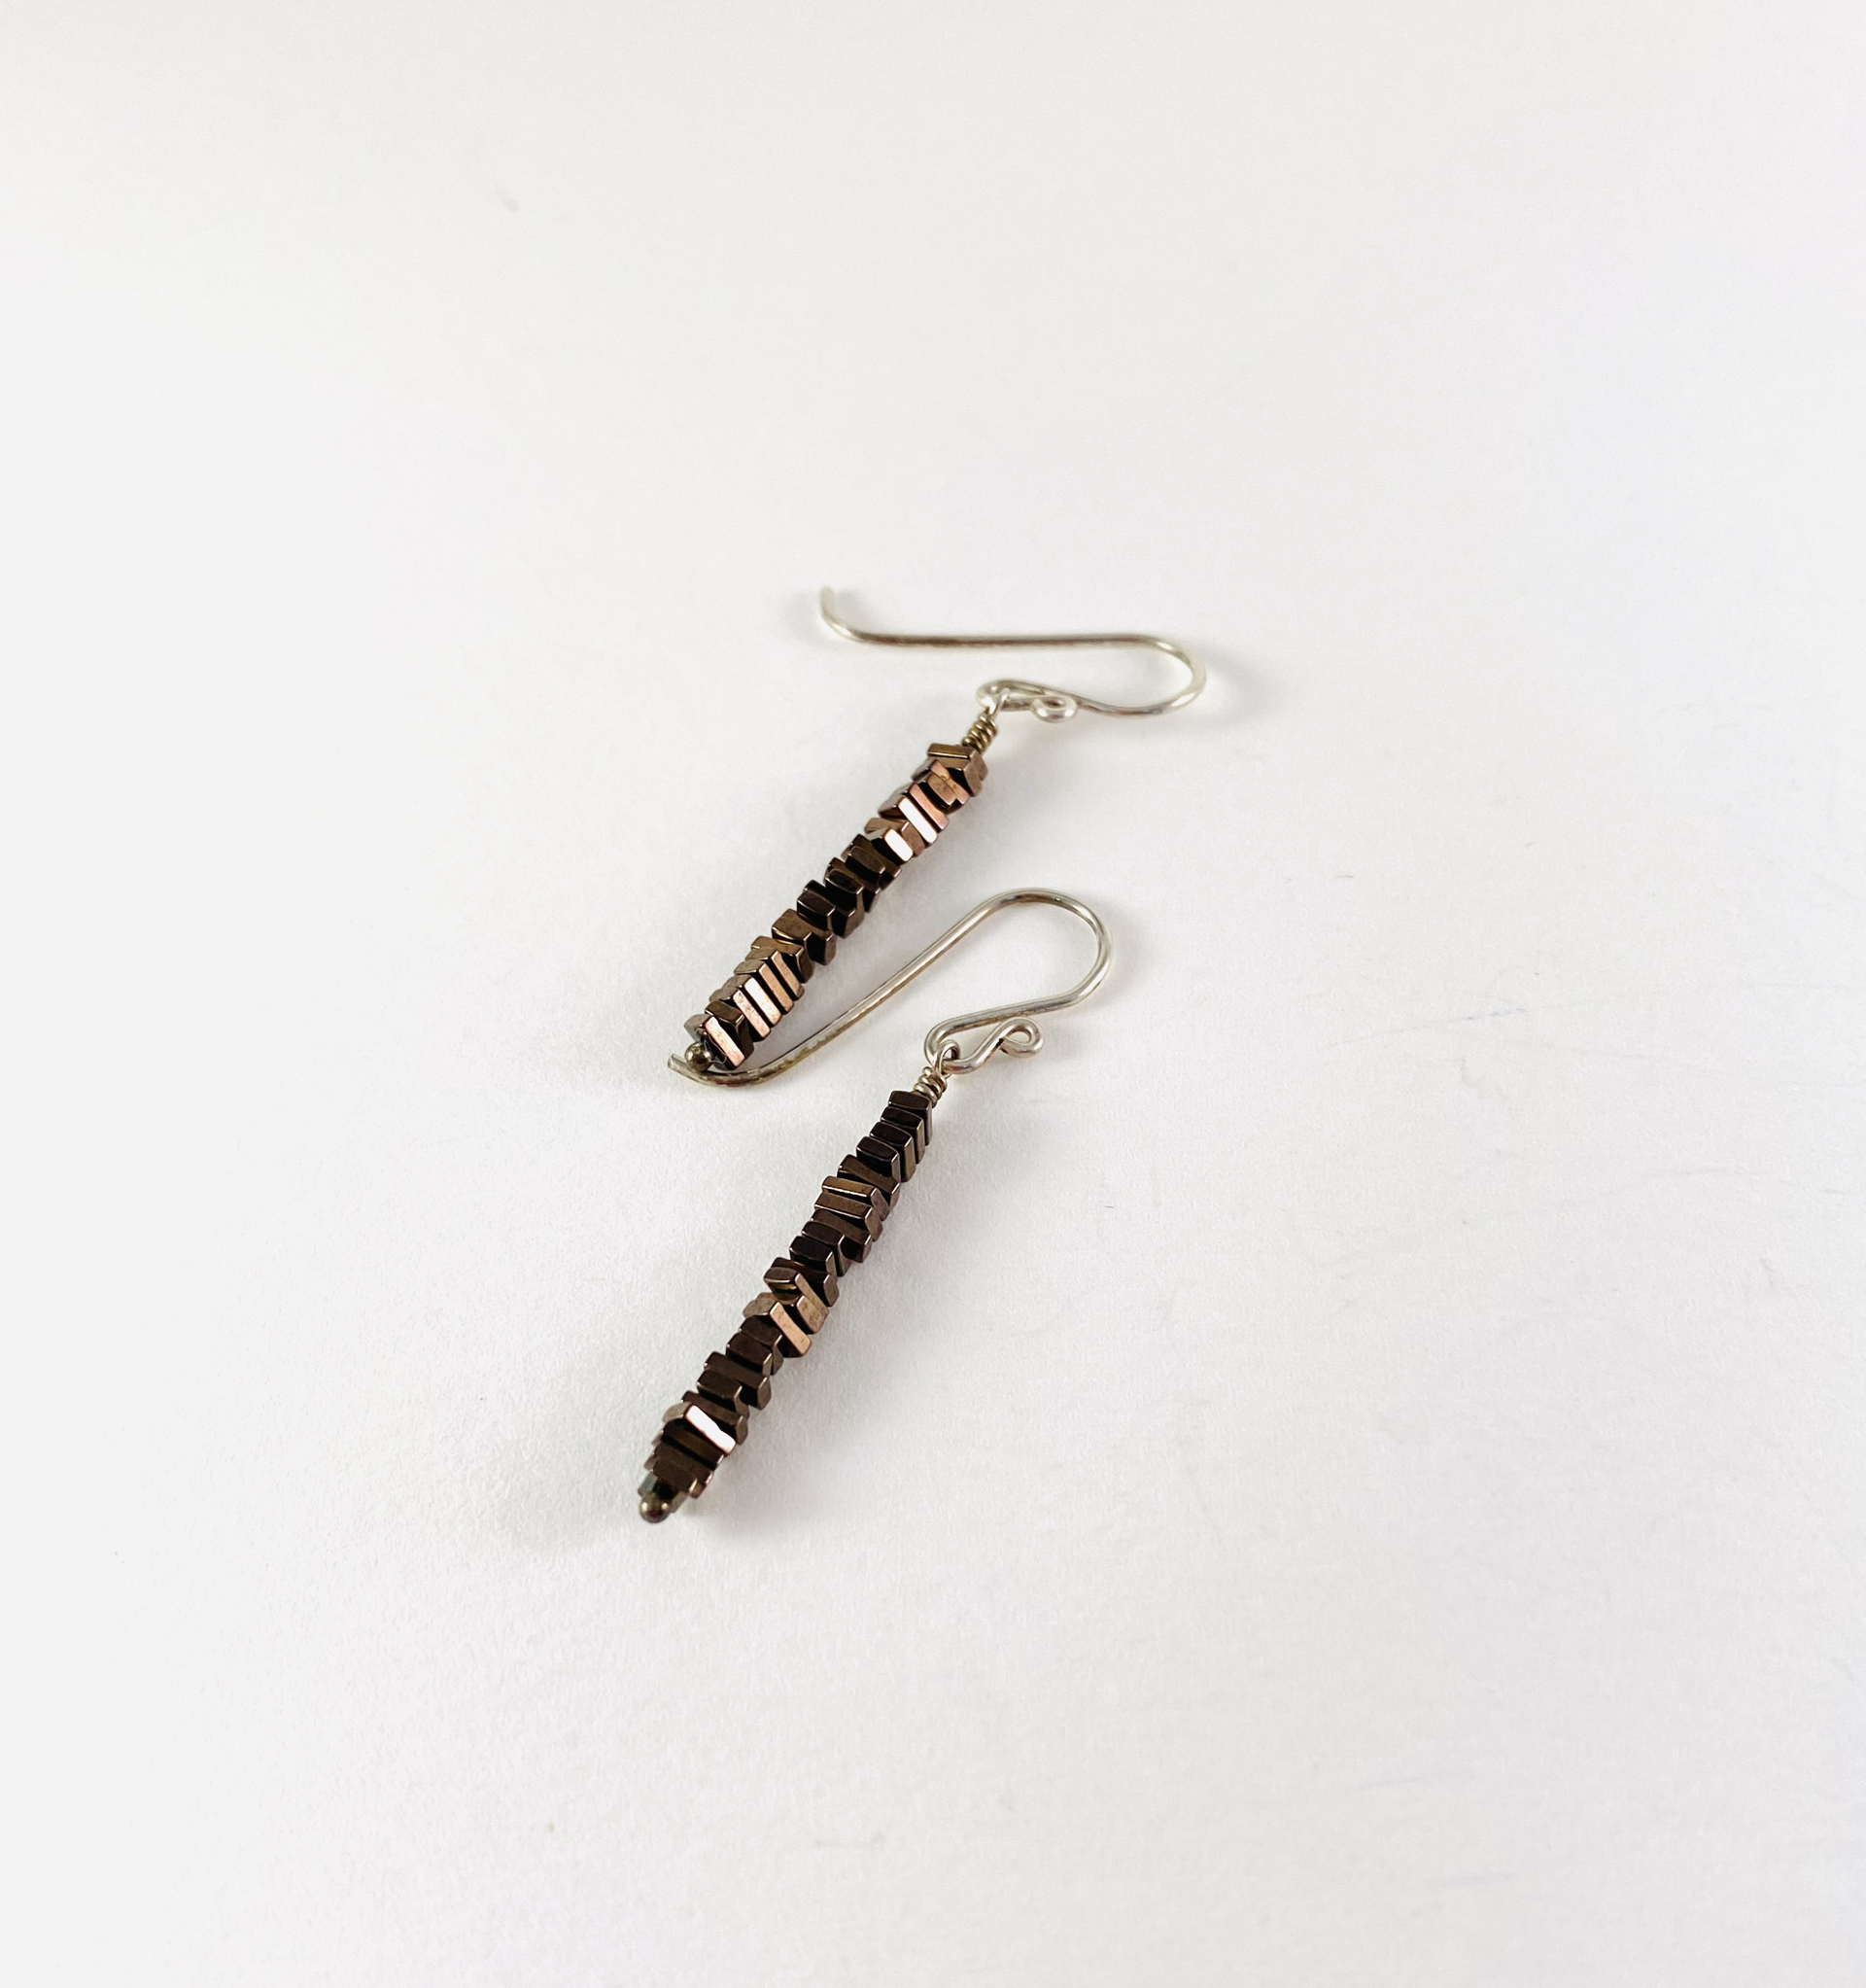 Silver and Hematite Earrings #10 by Shelby Lee - jewelry